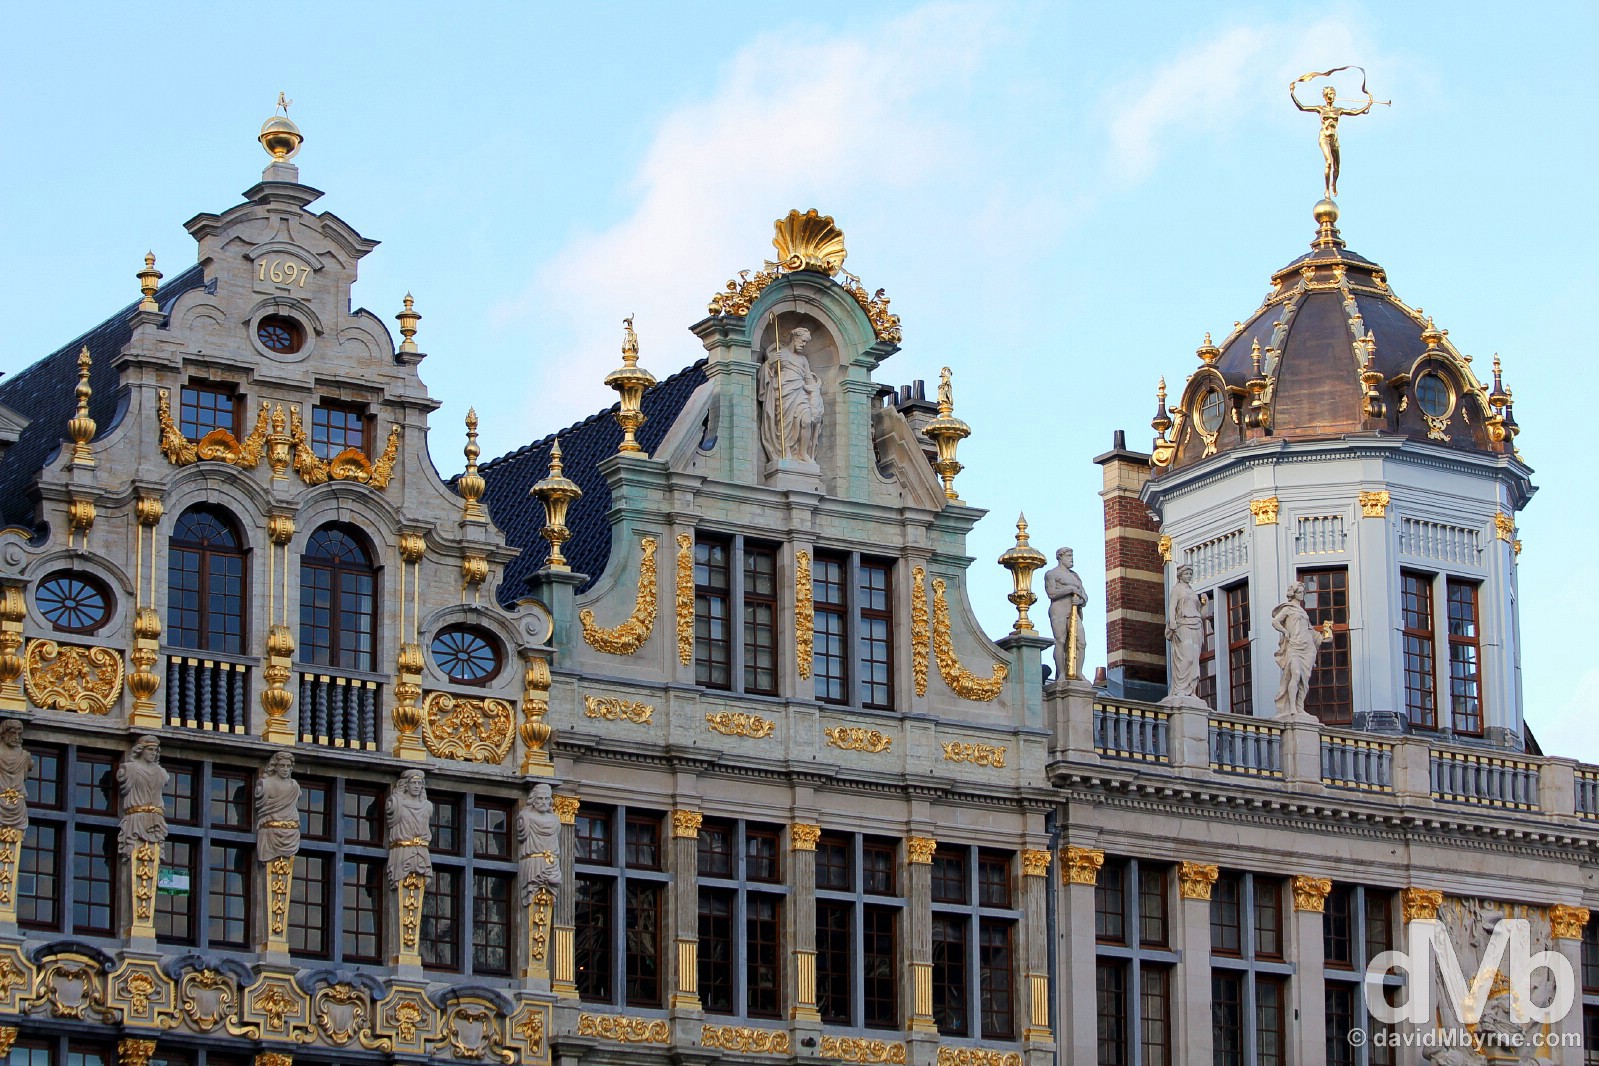 Building facades in Grand Place, Brussels, Belgium. January 14, 2016.